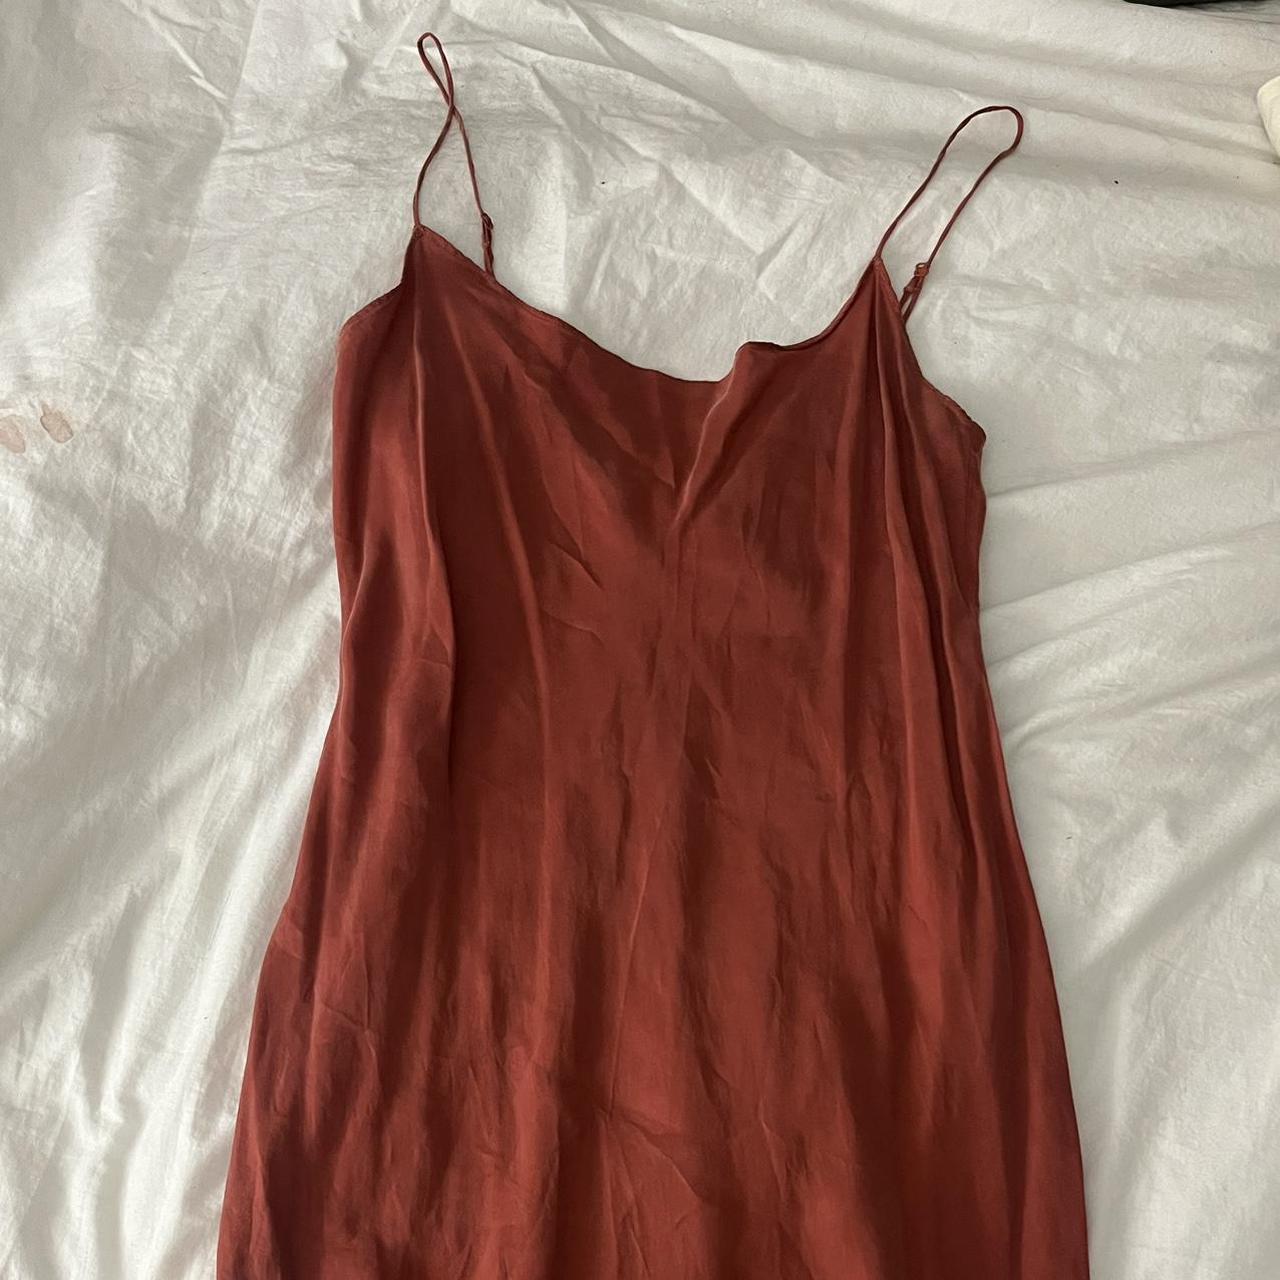 item listed by nicolithriftshop